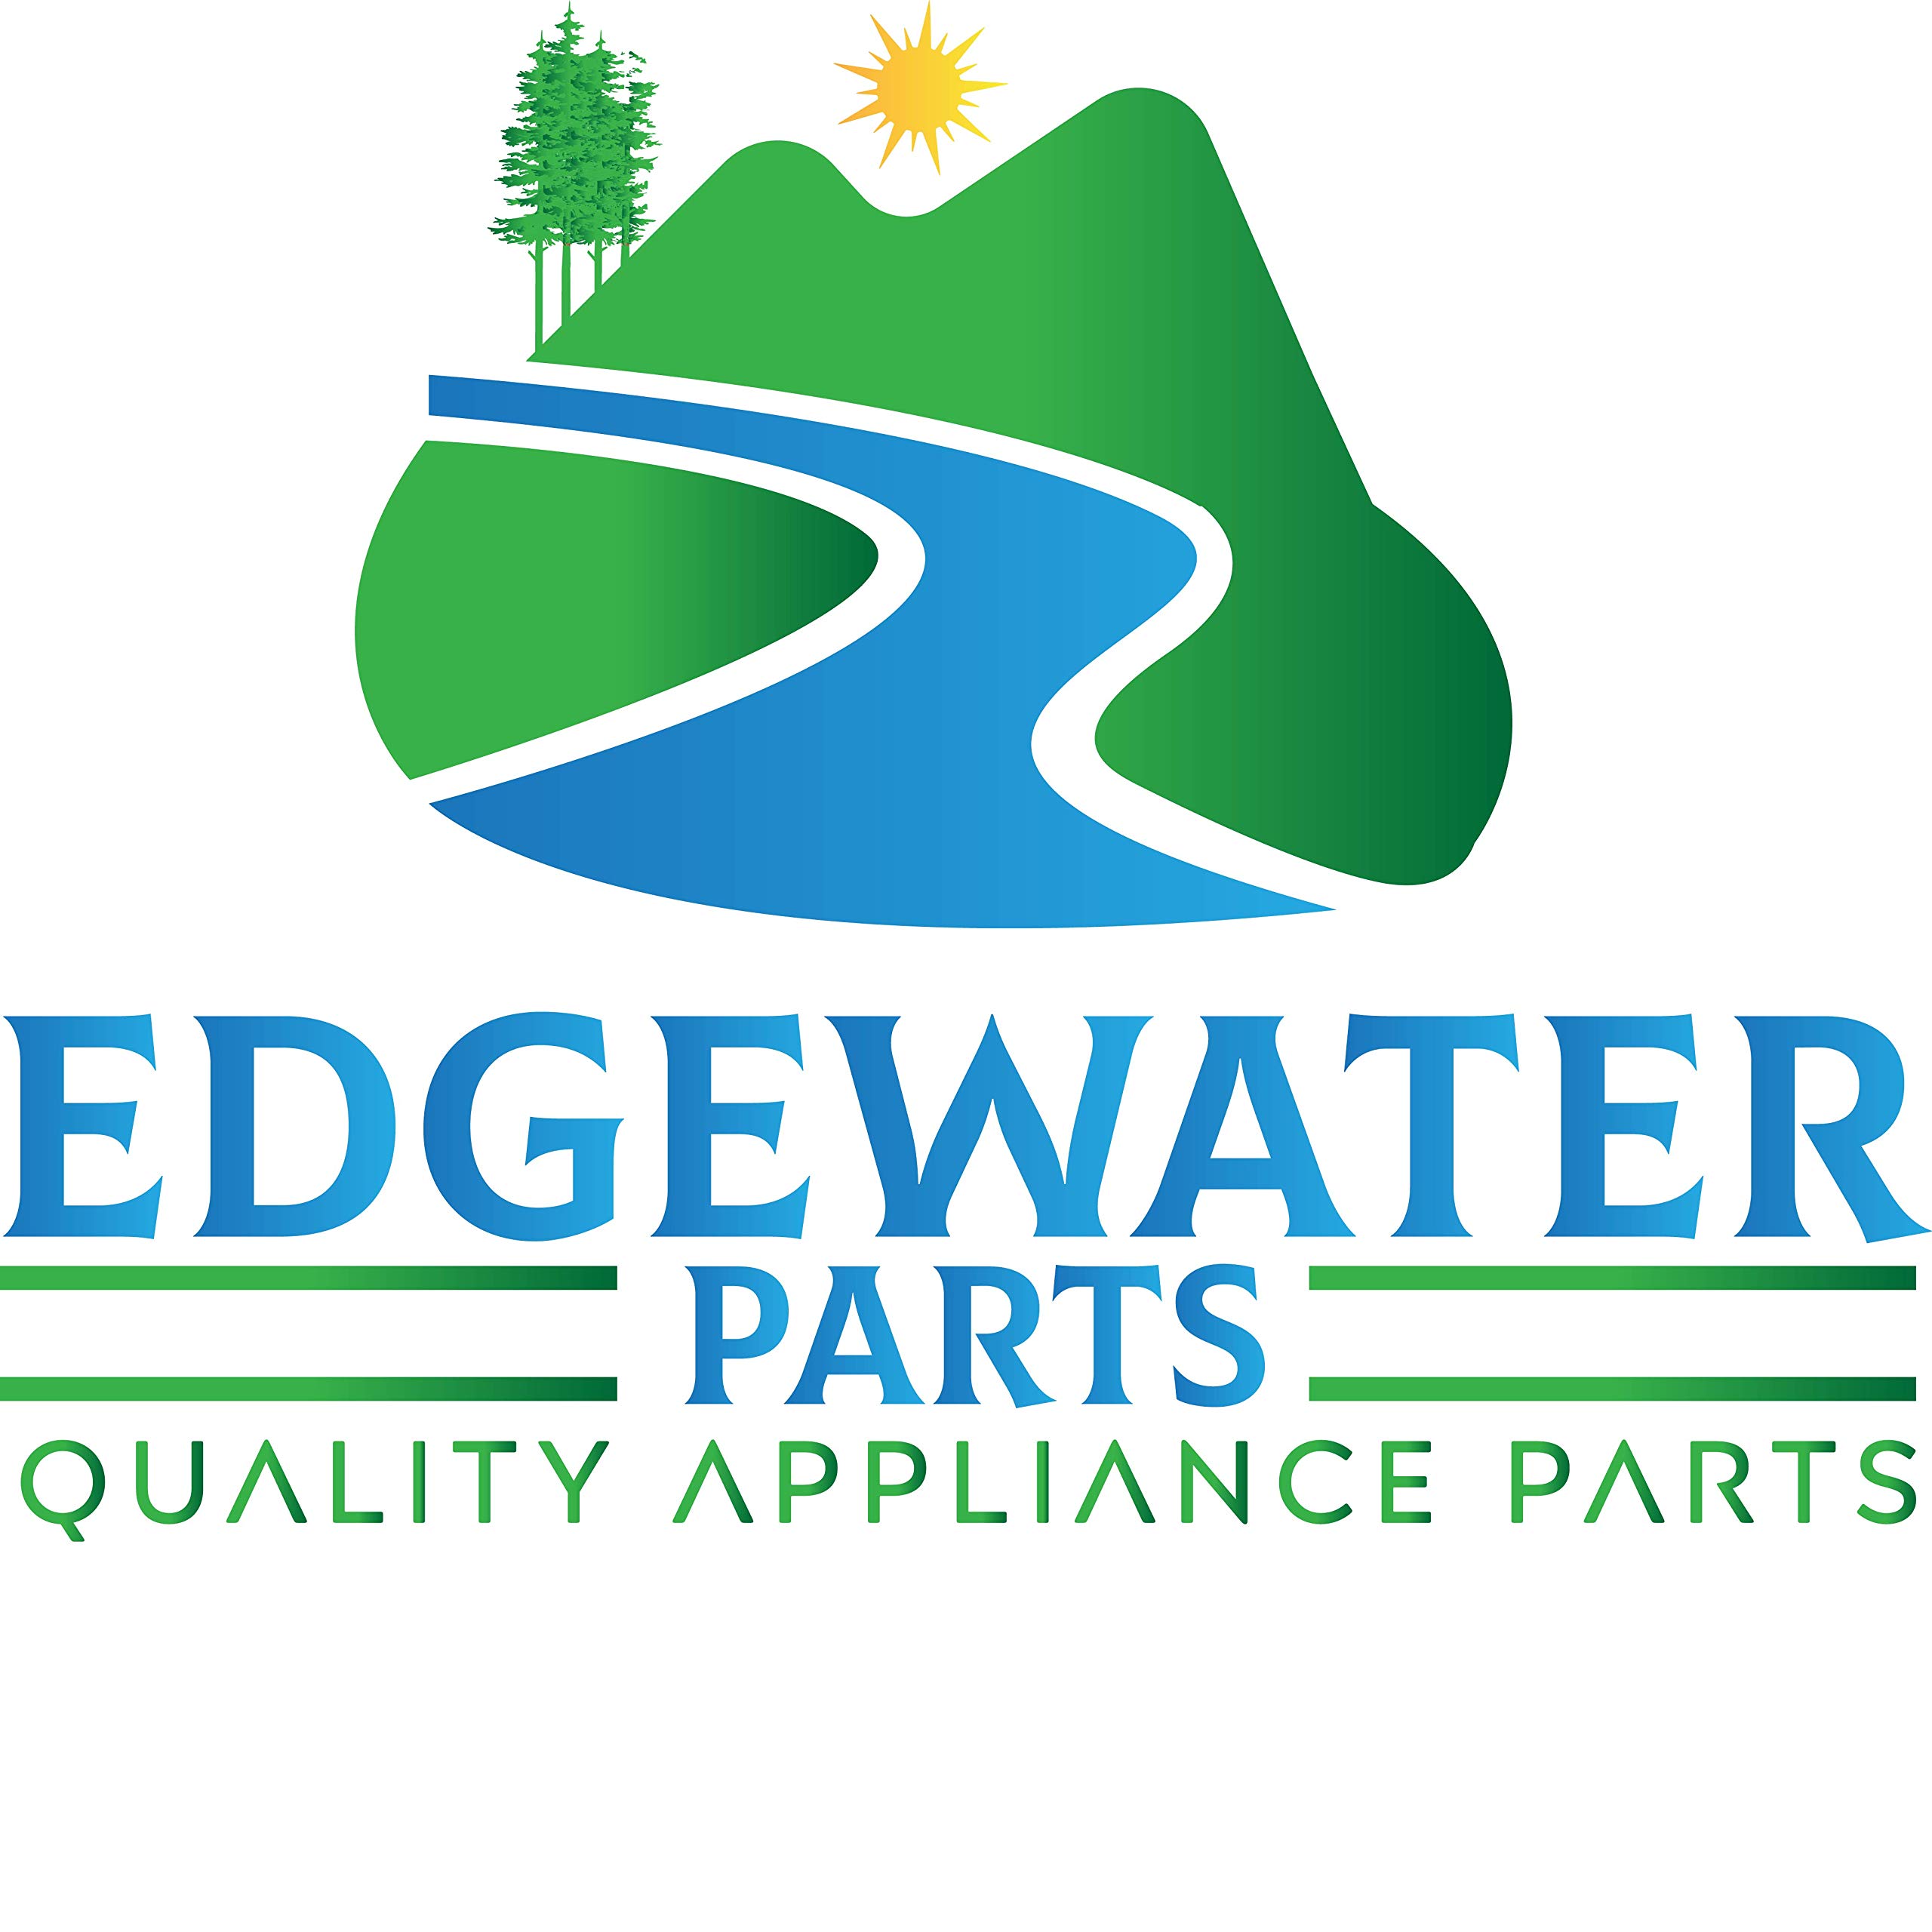 Edgewater Parts W10217917, WPW10217917 AP6017258, PS11750553 Water Valve Compatible With Whirlpool Refrigerator (Fits Models: KUI, GI1, 106, JIM, MIM And More)